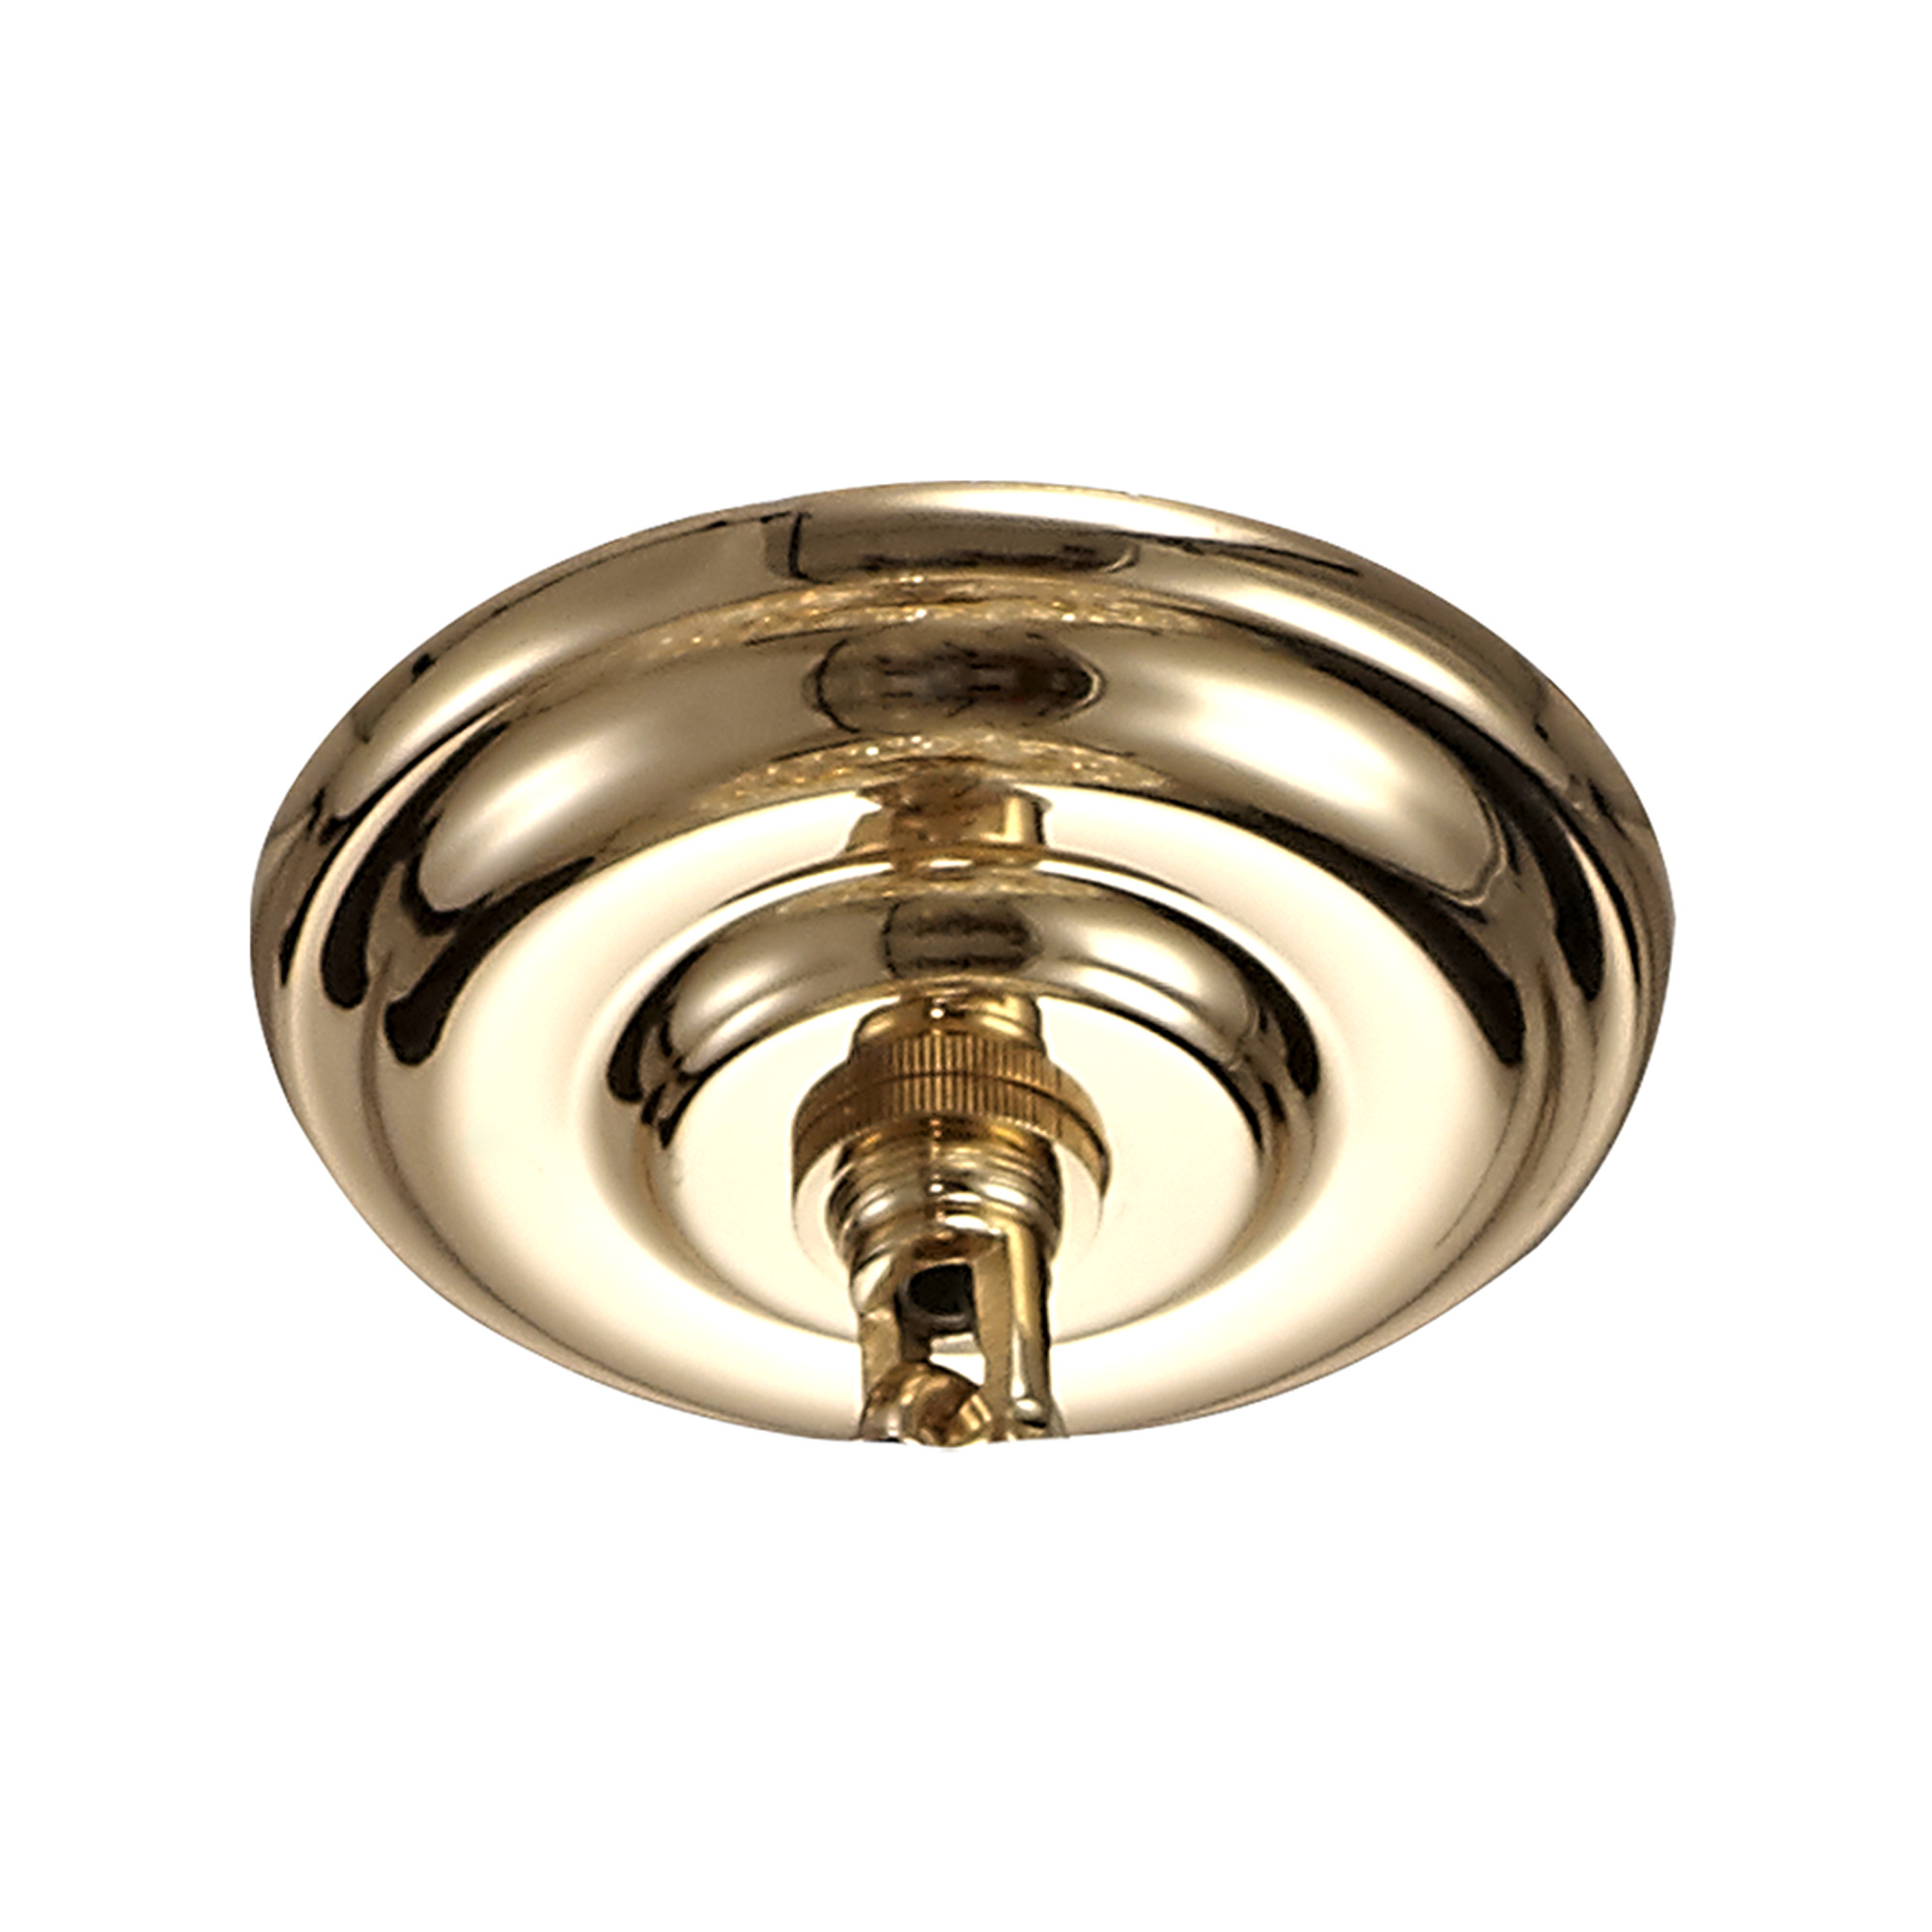 Ceiling Plate Ceiling Lights Diyas Ceiling Accessories